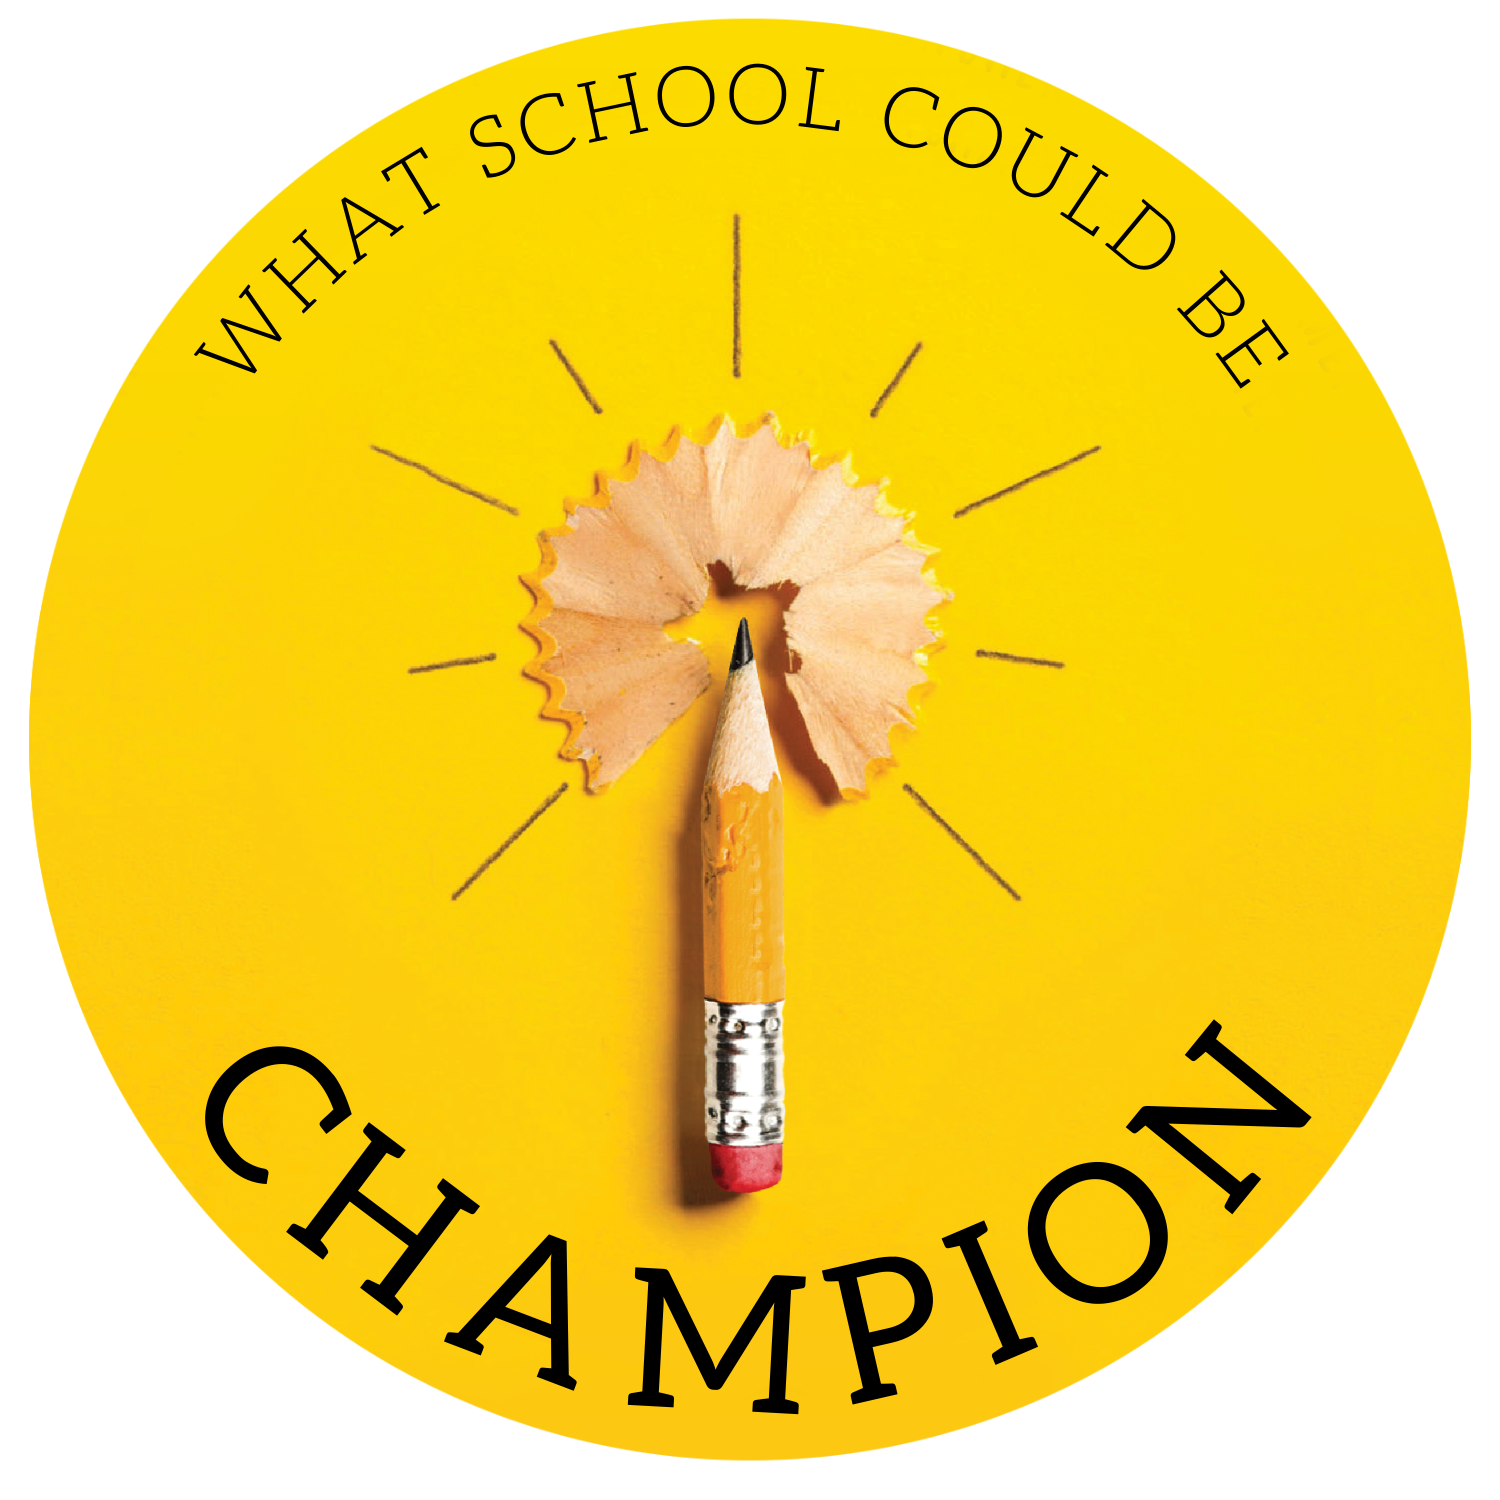 What Schools Could Be Champion